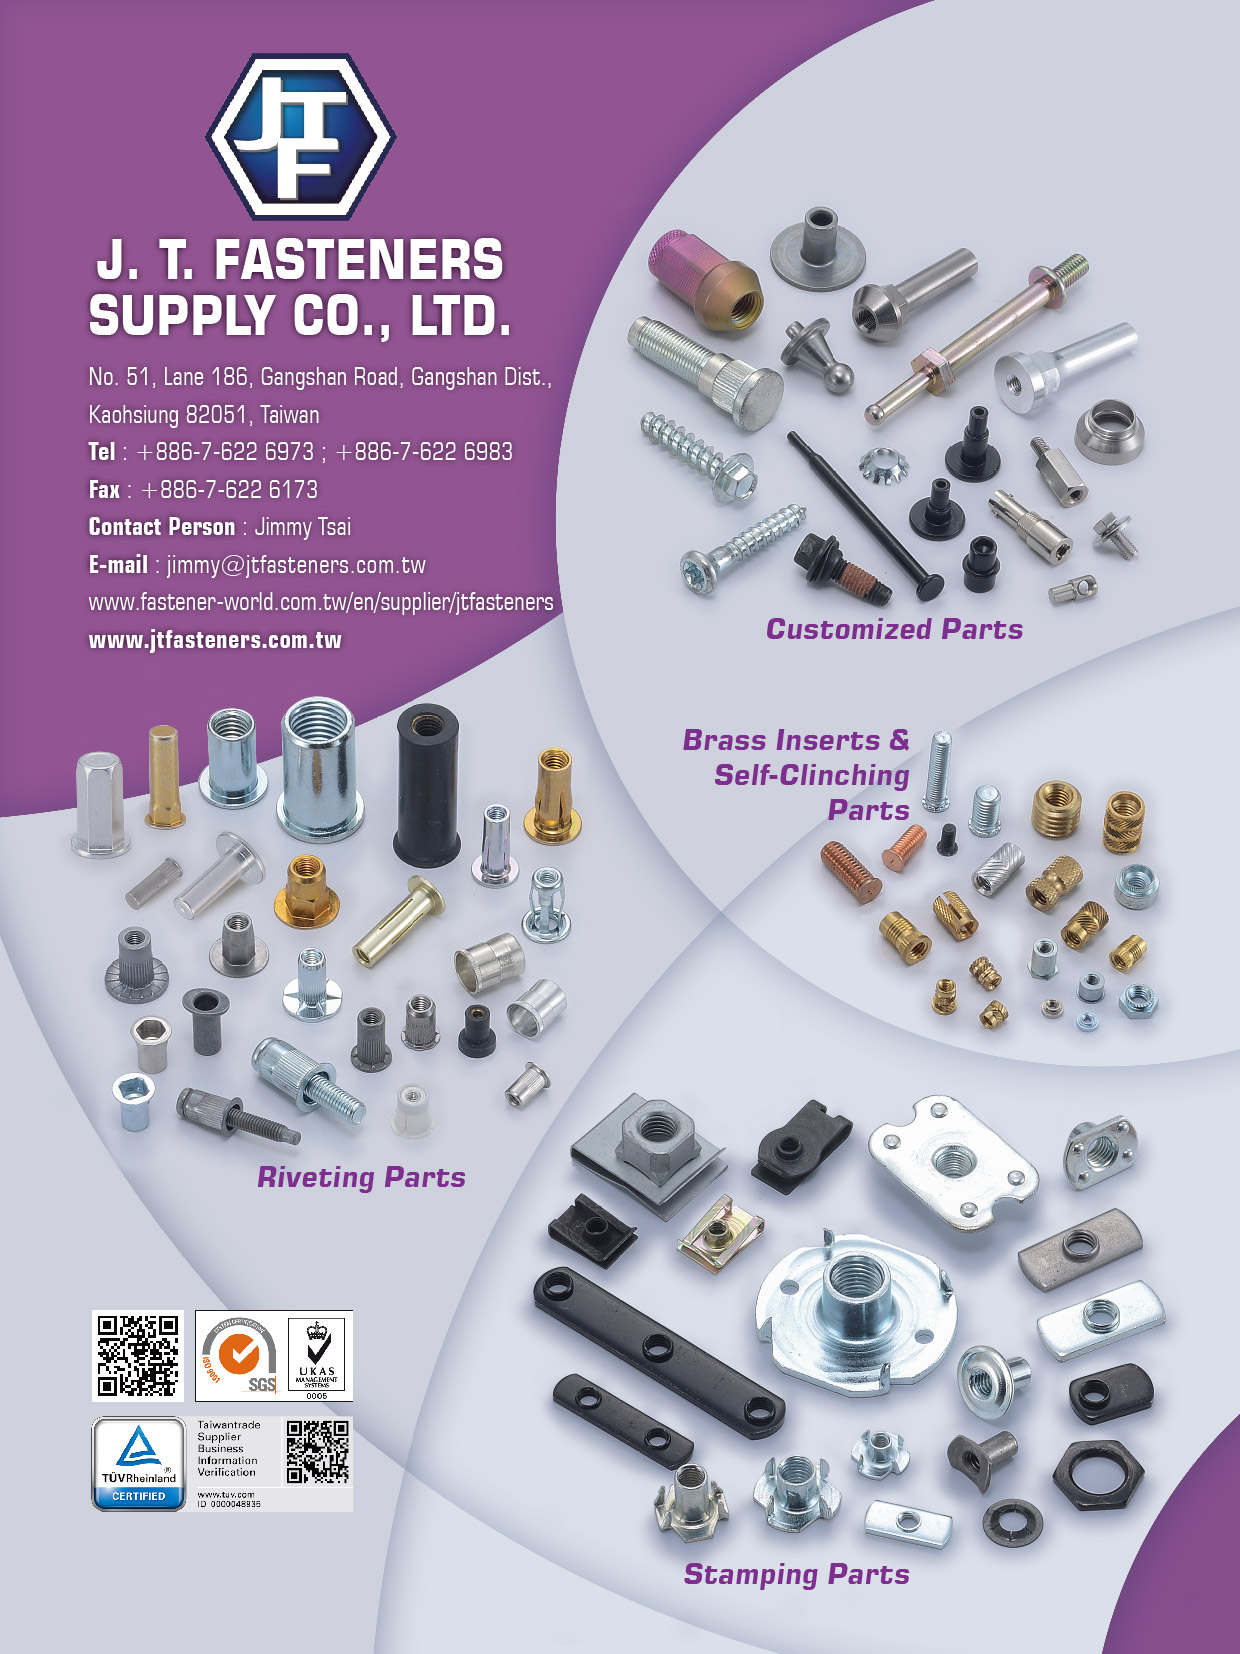 J. T. FASTENERS SUPPLY CO., LTD. _Online Catalogues